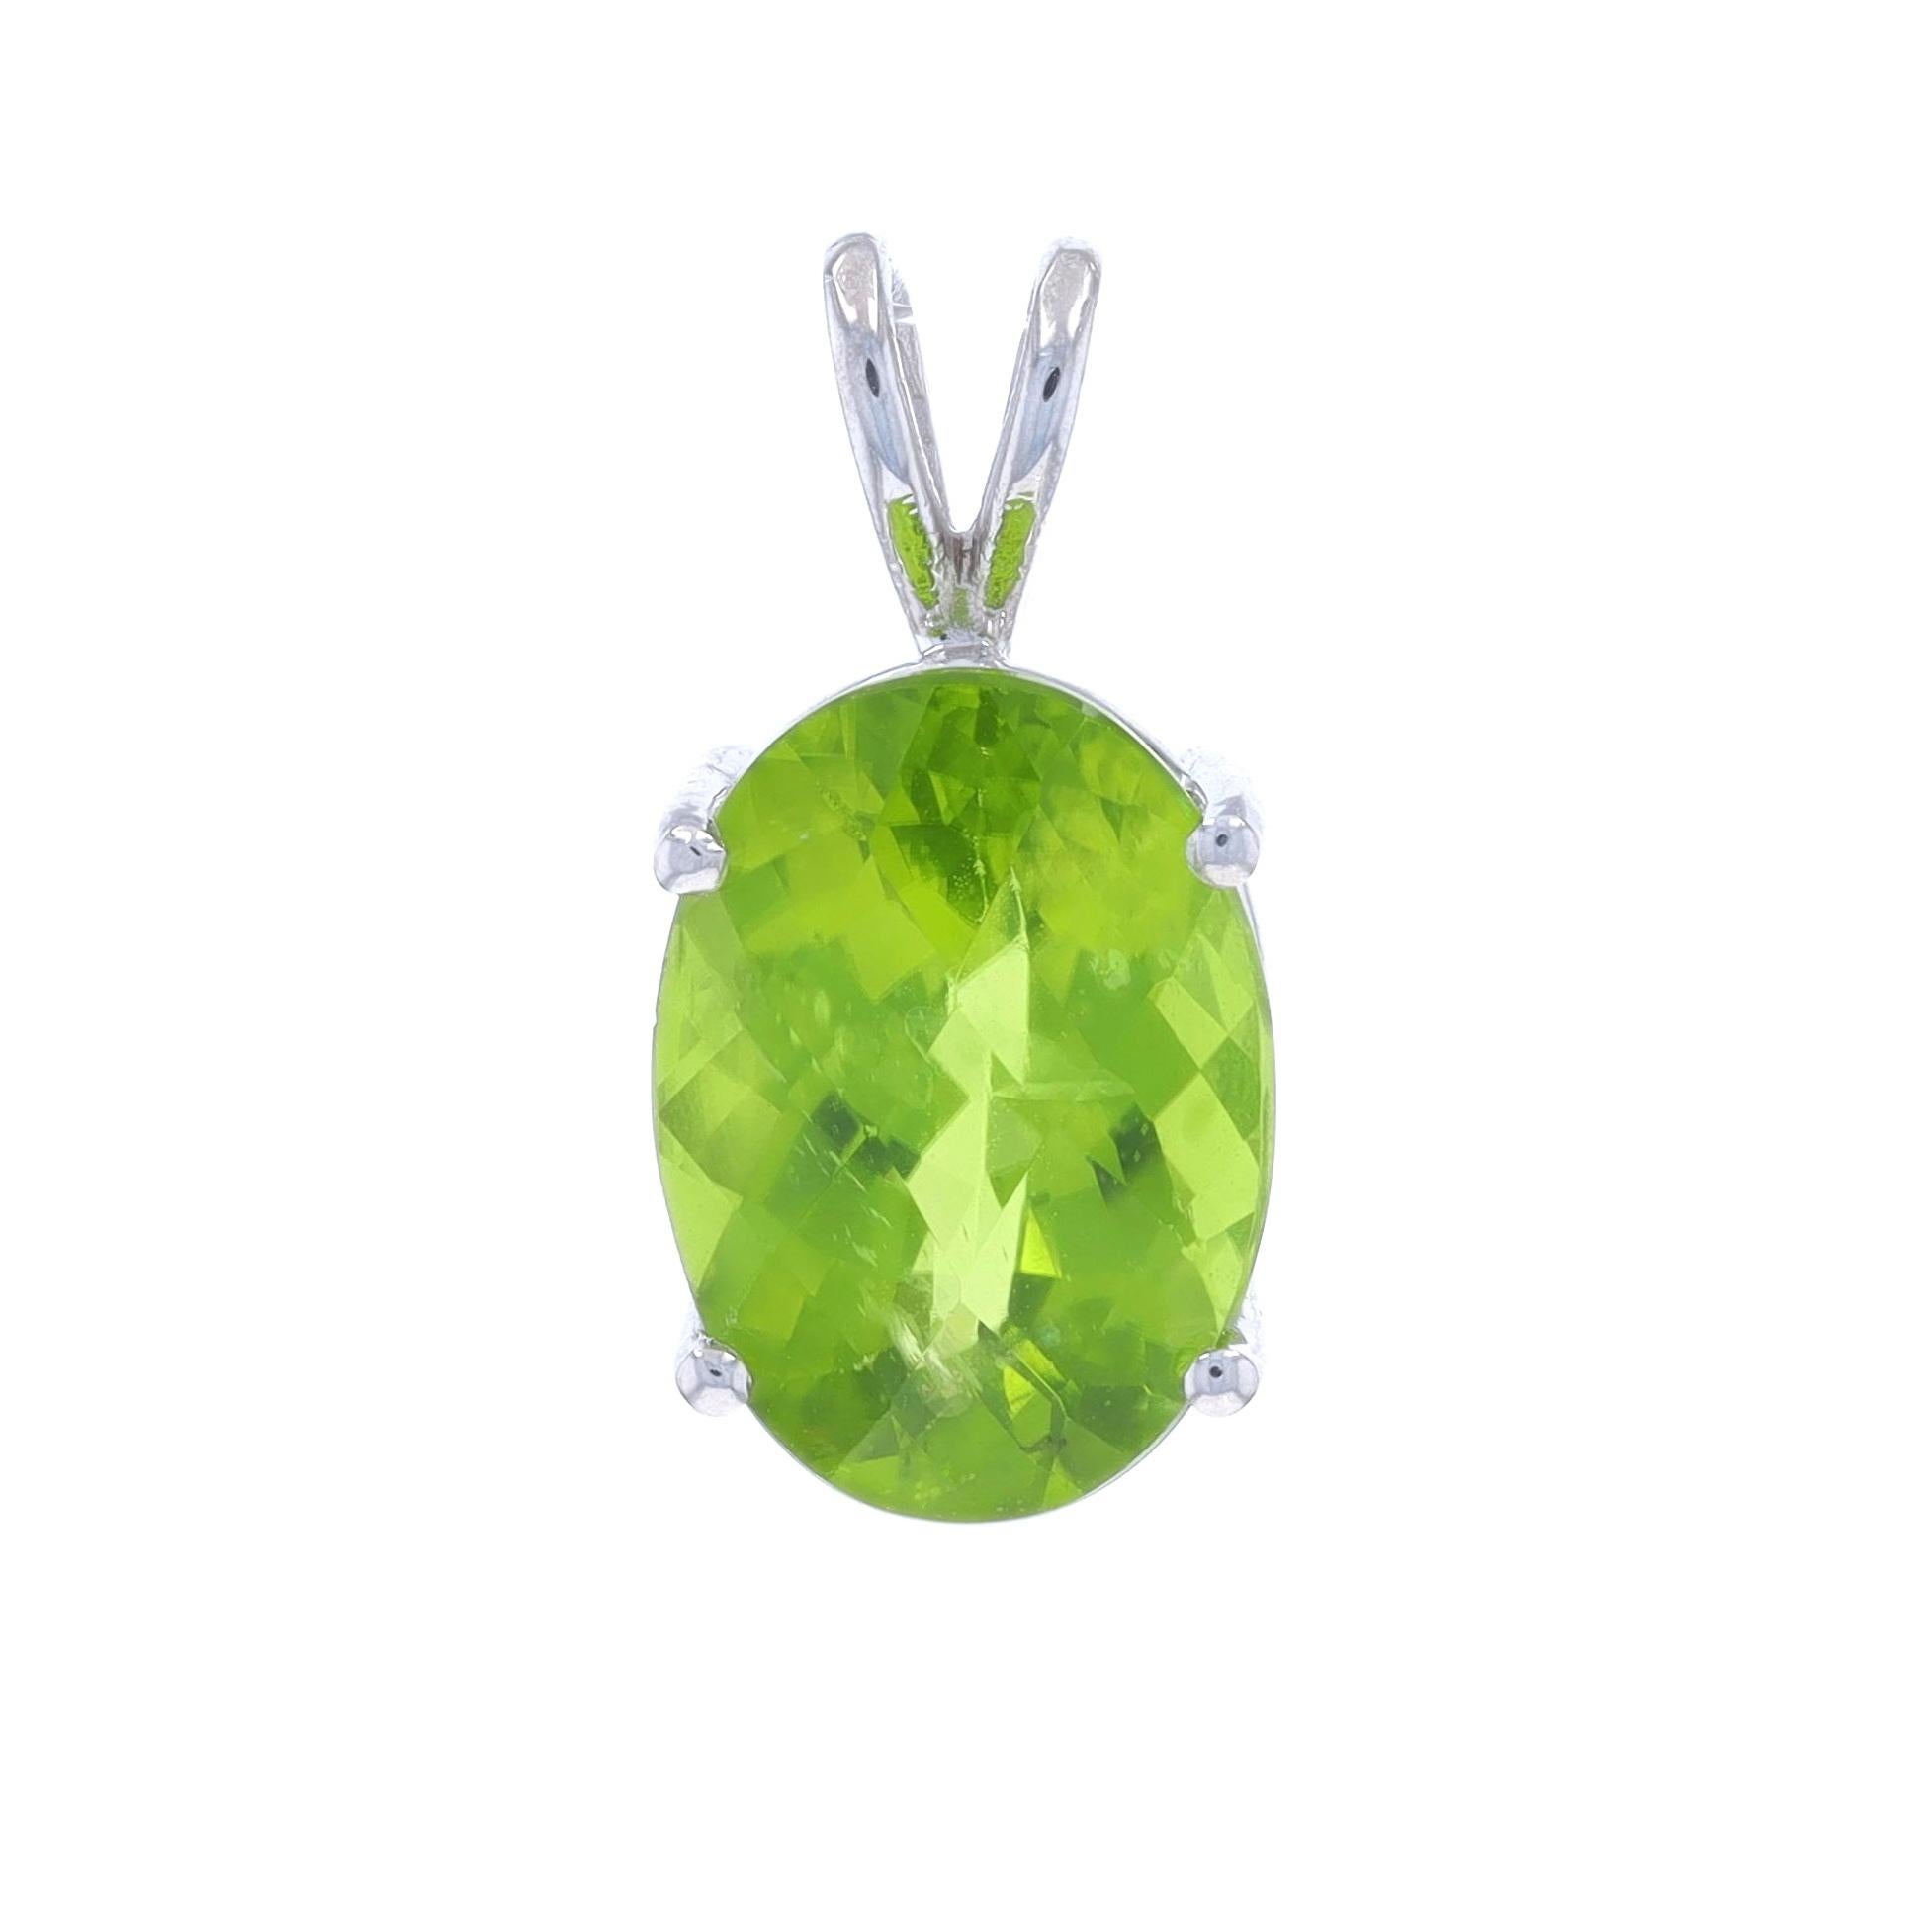 Metal Content: 14k White Gold

Stone Information

Natural Peridot
Carat(s): 5.83ct
Cut: Oval Checkerboard
Color: Green

Total Carats: 5.83ctw

Style: Solitaire

Measurements

Tall (from stationary bail): 25/32